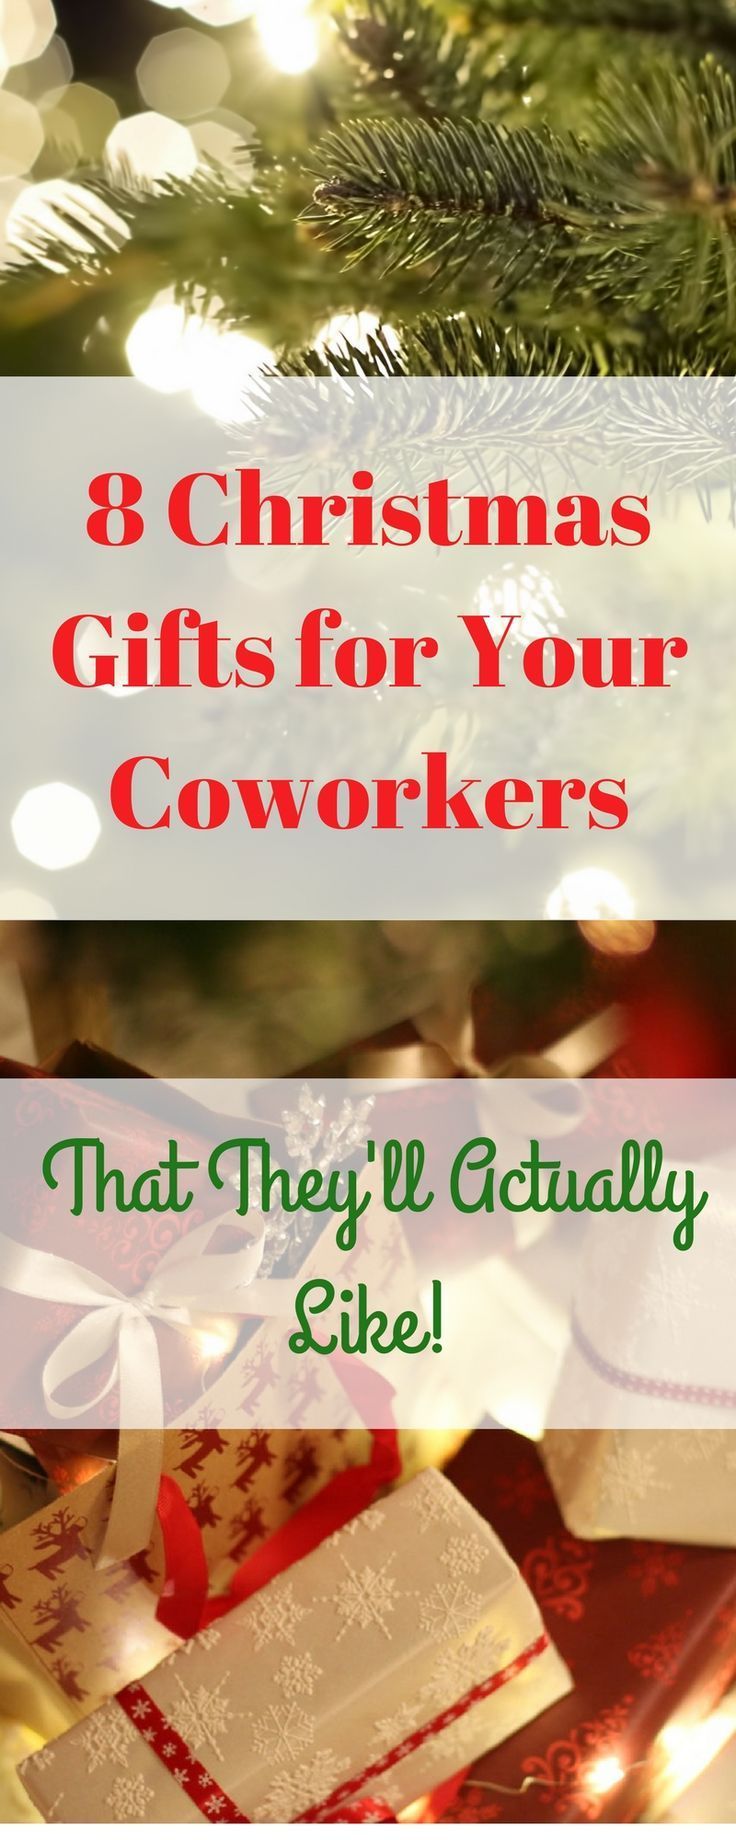 8 Christmas Gifts For Your Coworkers | The Arrow -   19 xmas gifts for coworkers ideas